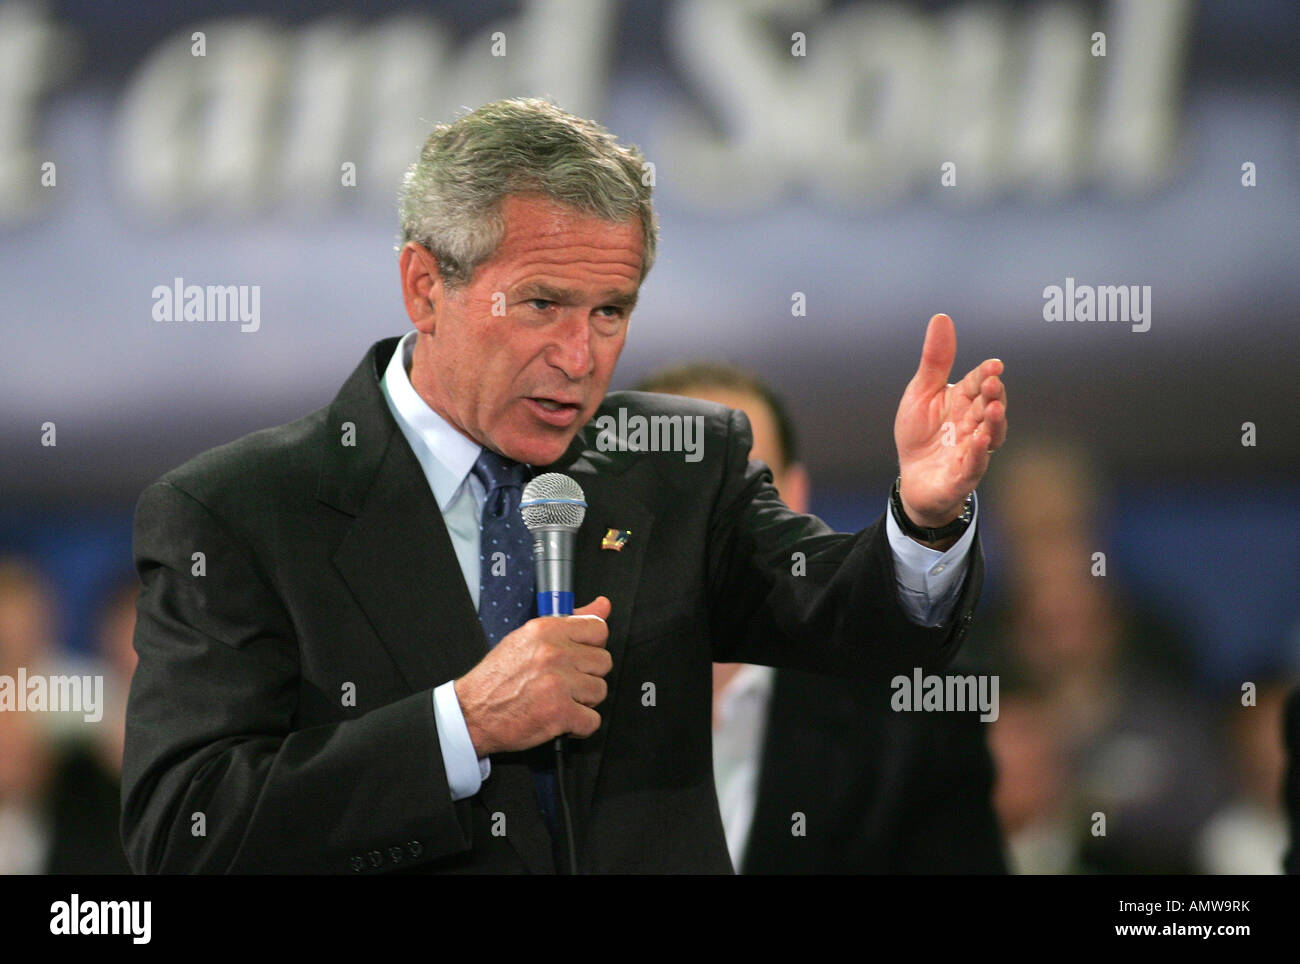 President G W Bush campaigns at an Ask President Bush event at Northern Virginia Community College in Annandale, Stock Photo